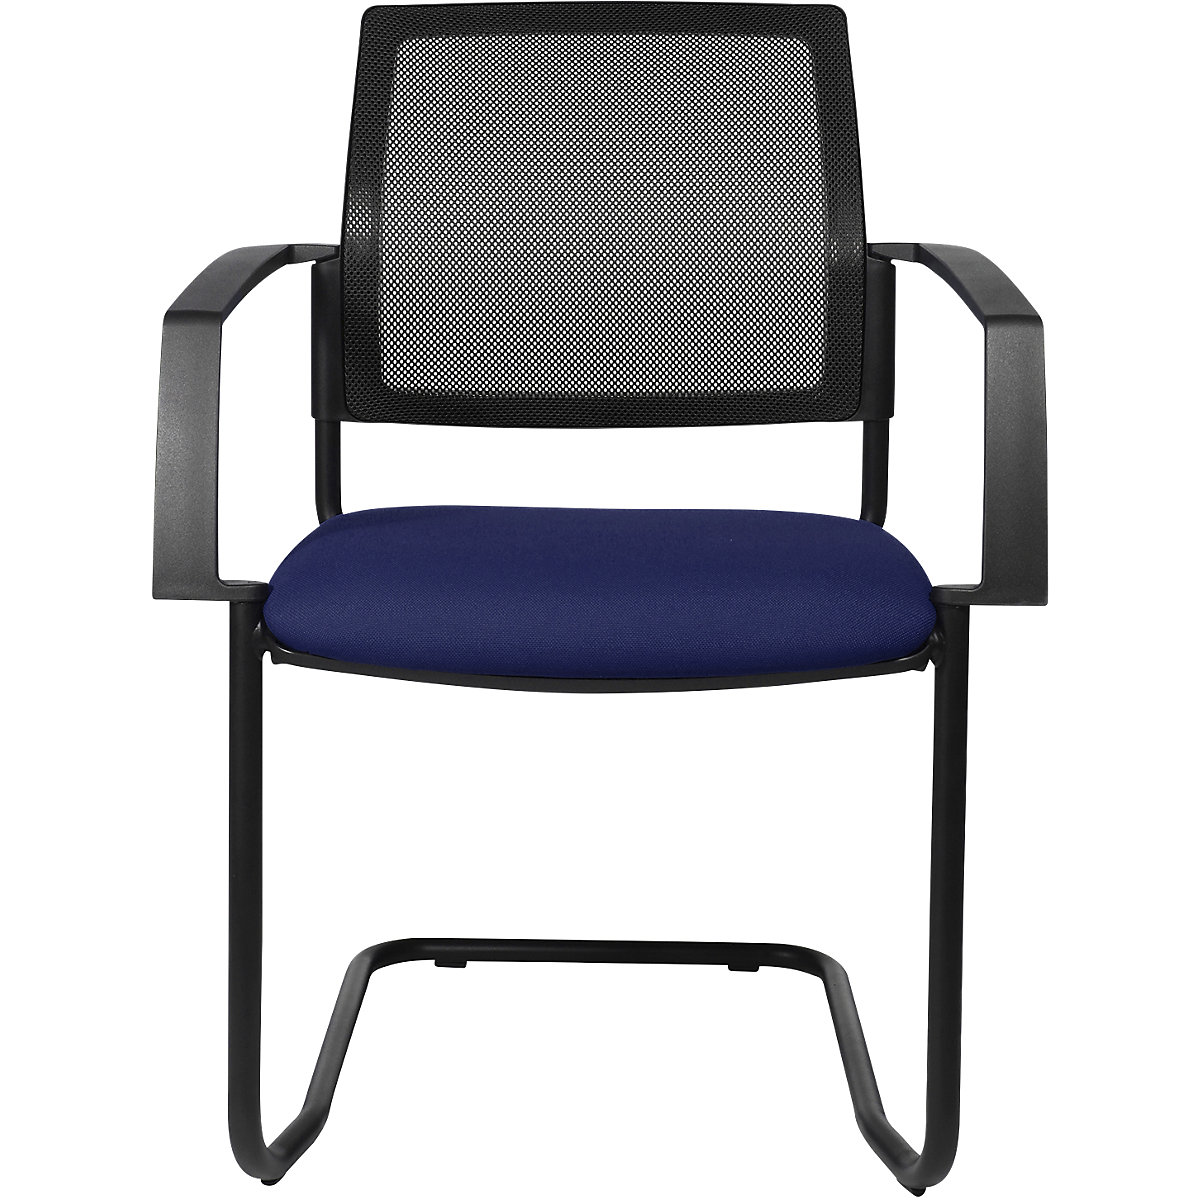 Mesh stacking chair – Topstar, cantilever chair, pack of 2, blue seat, black frame-8